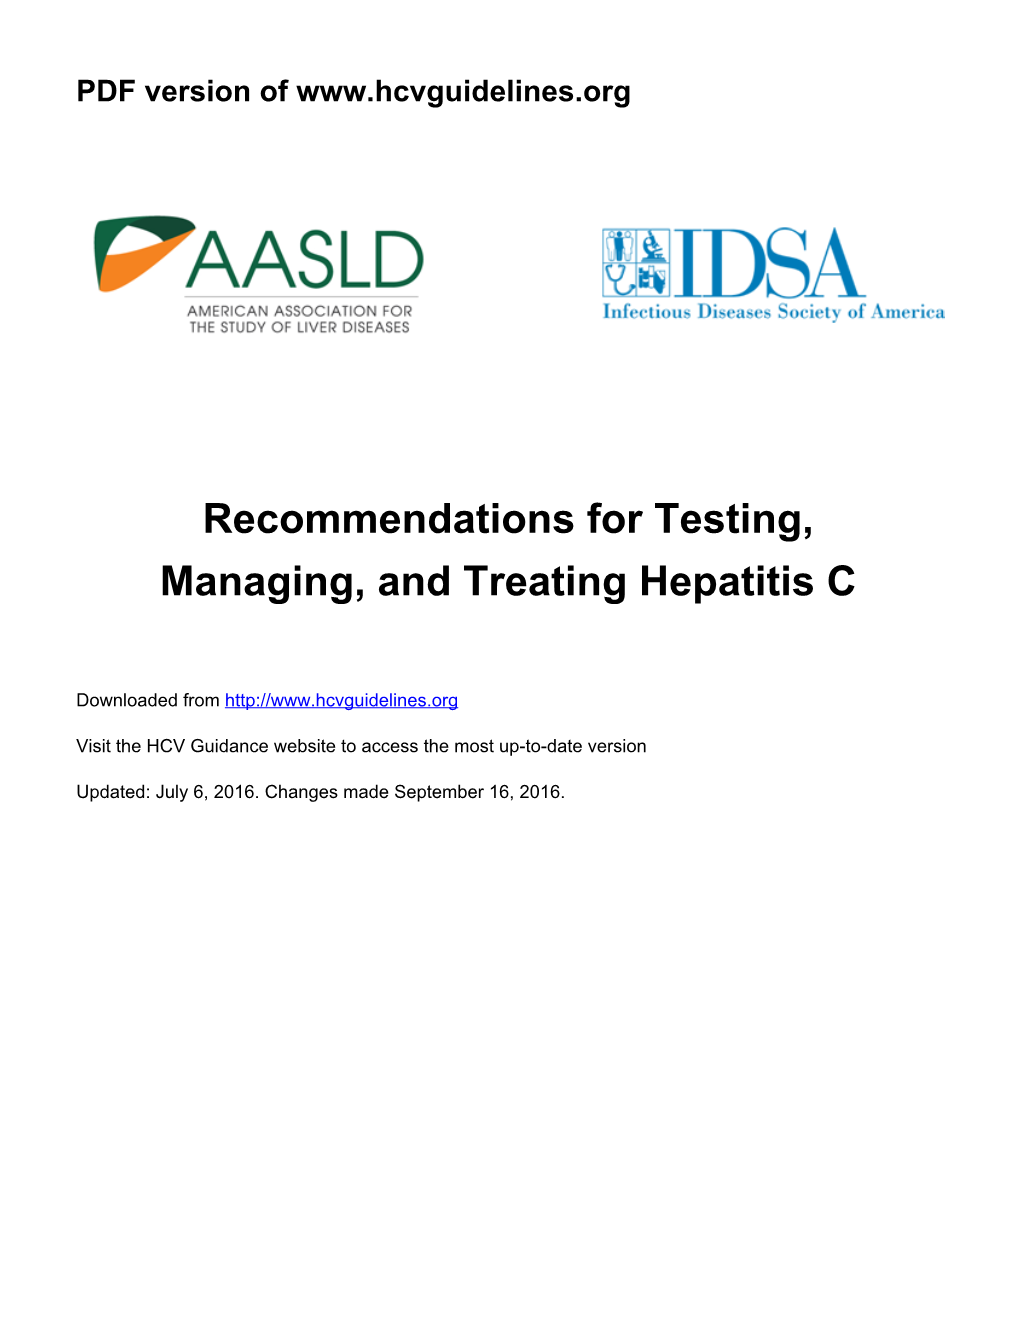 Recommendations for Testing, Managing, and Treating Hepatitis C